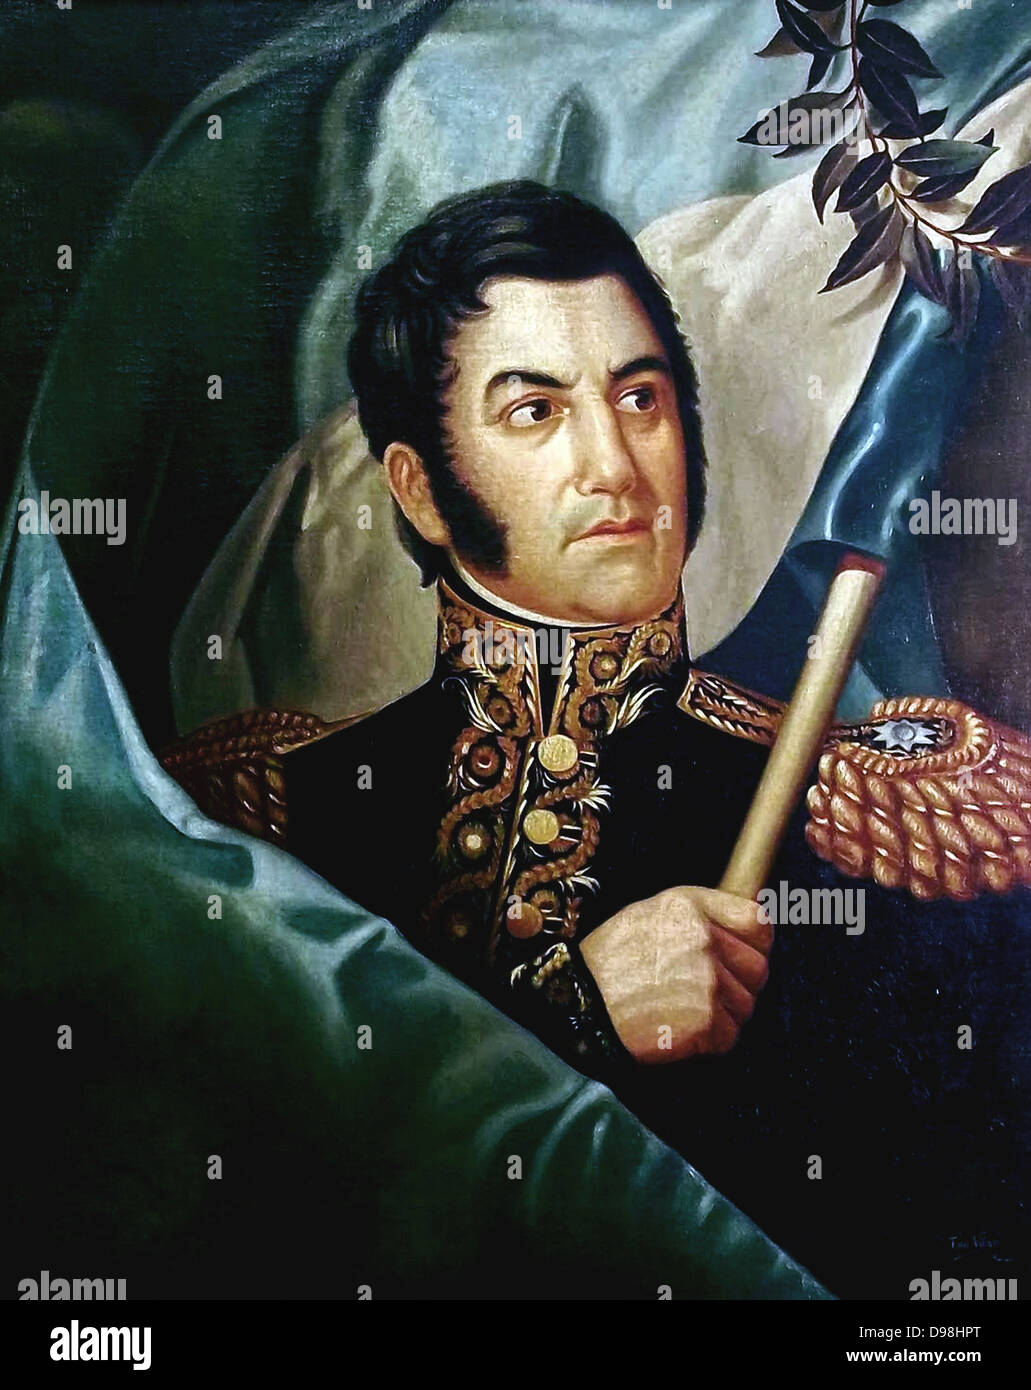 Portrait of General Jose de San Martin (circa 1829)) possibly by Jean Baptiste Madou. José Francisco de San Martín, known simply as Don José de San Martín (c. 1778 – 17 August 1850), was an Argentine general and the prime leader of the southern part of South America's successful struggle for independence from Spain. Stock Photo